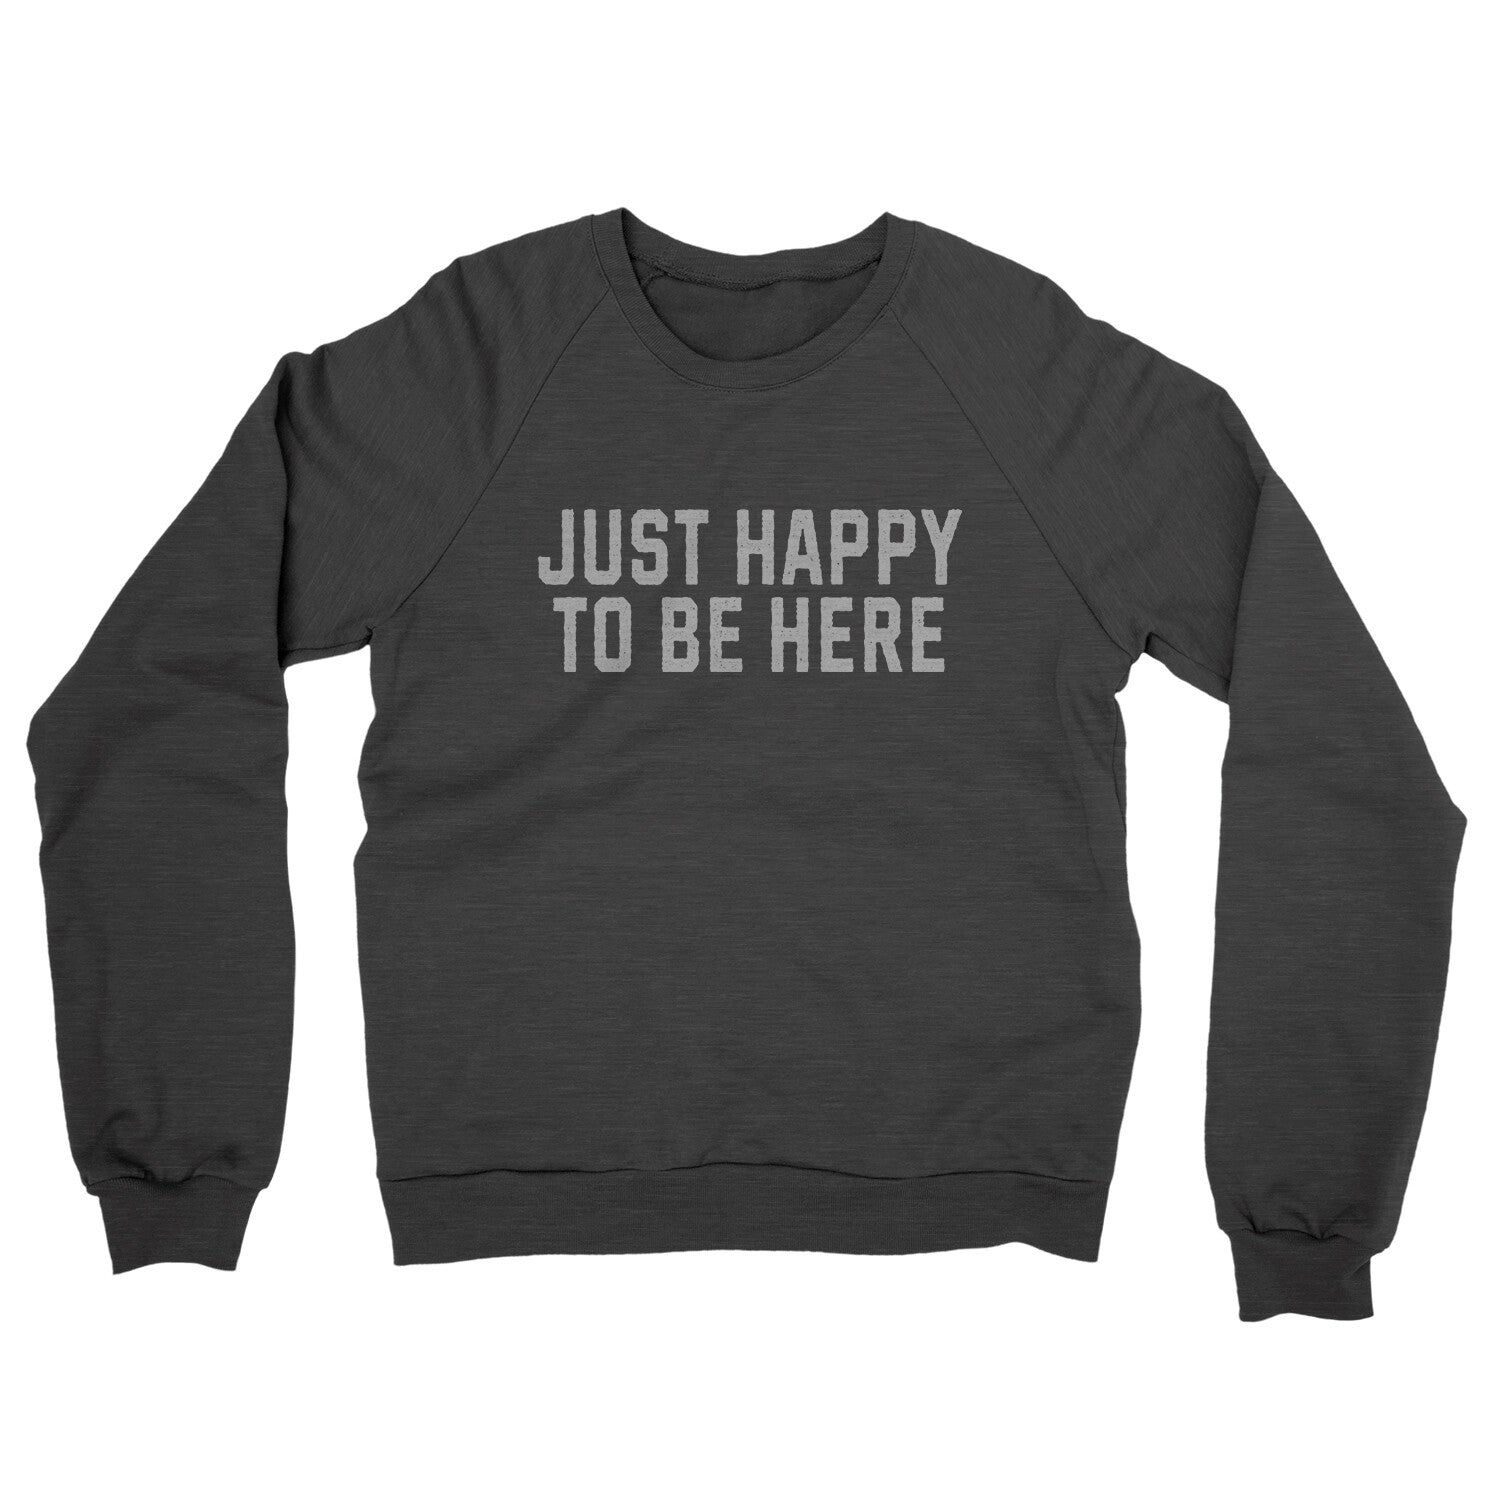 Just Happy to be Here in Charcoal Heather Color